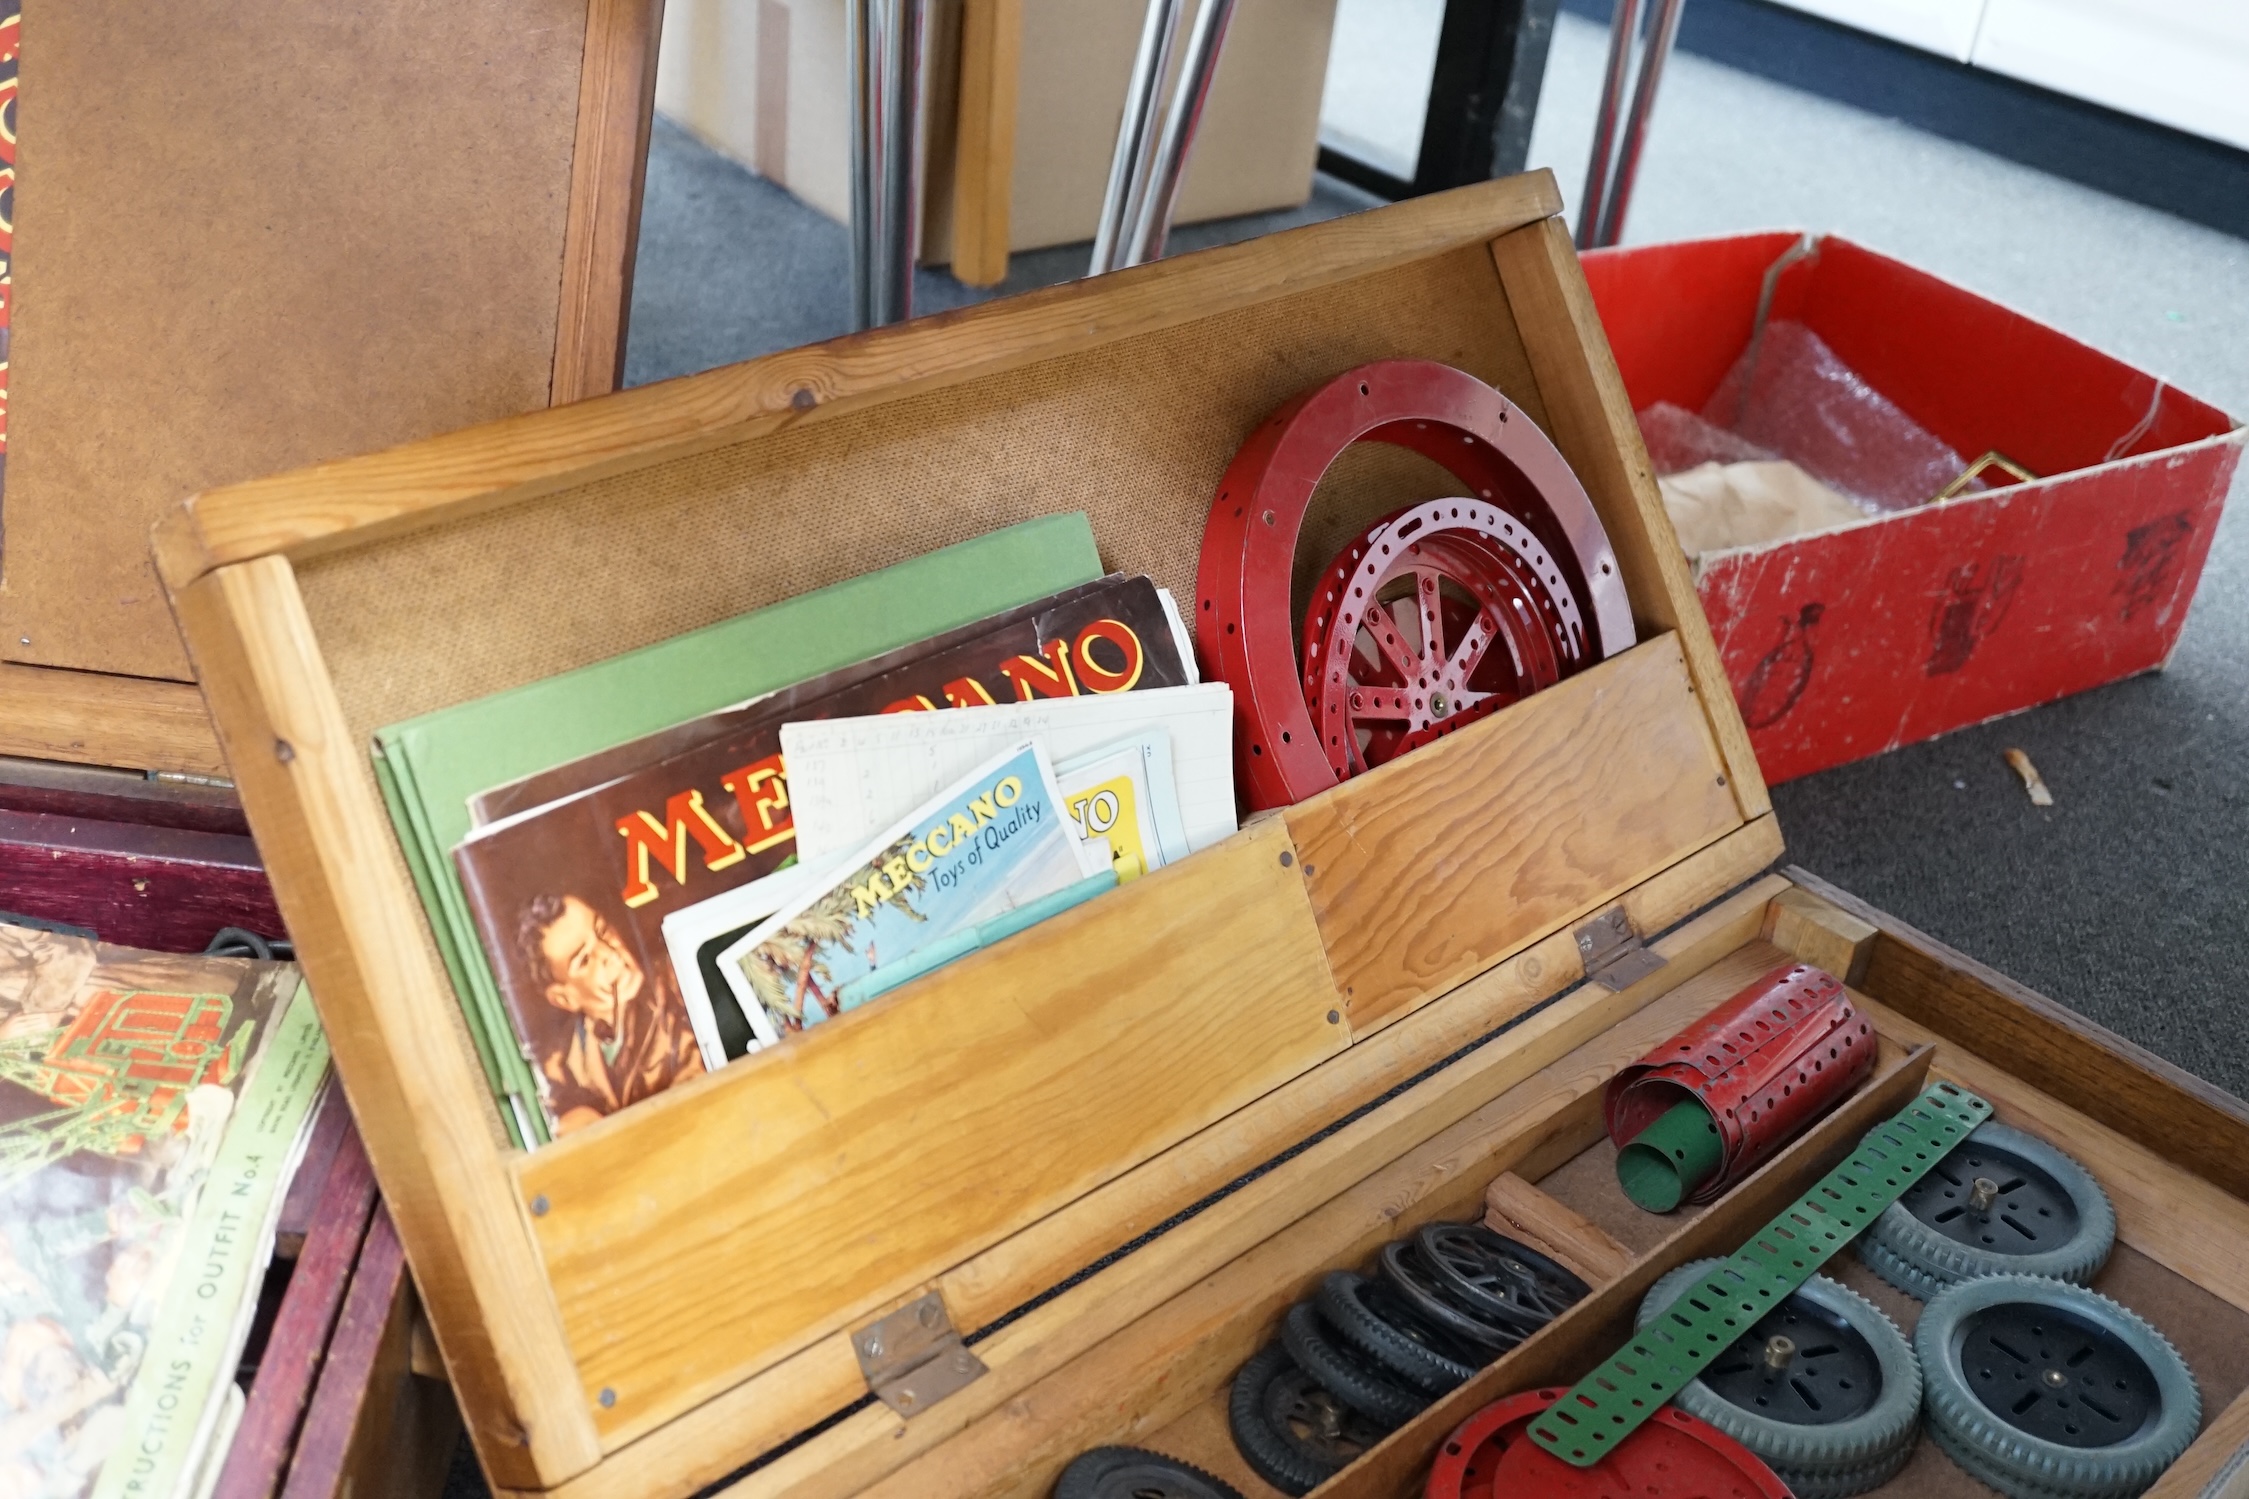 A collection of early Meccano components, mainly from the red and green period, comprising of some of the more unusual wheels and circular parts, some instruction books, etc. well organised into two wooden boxes